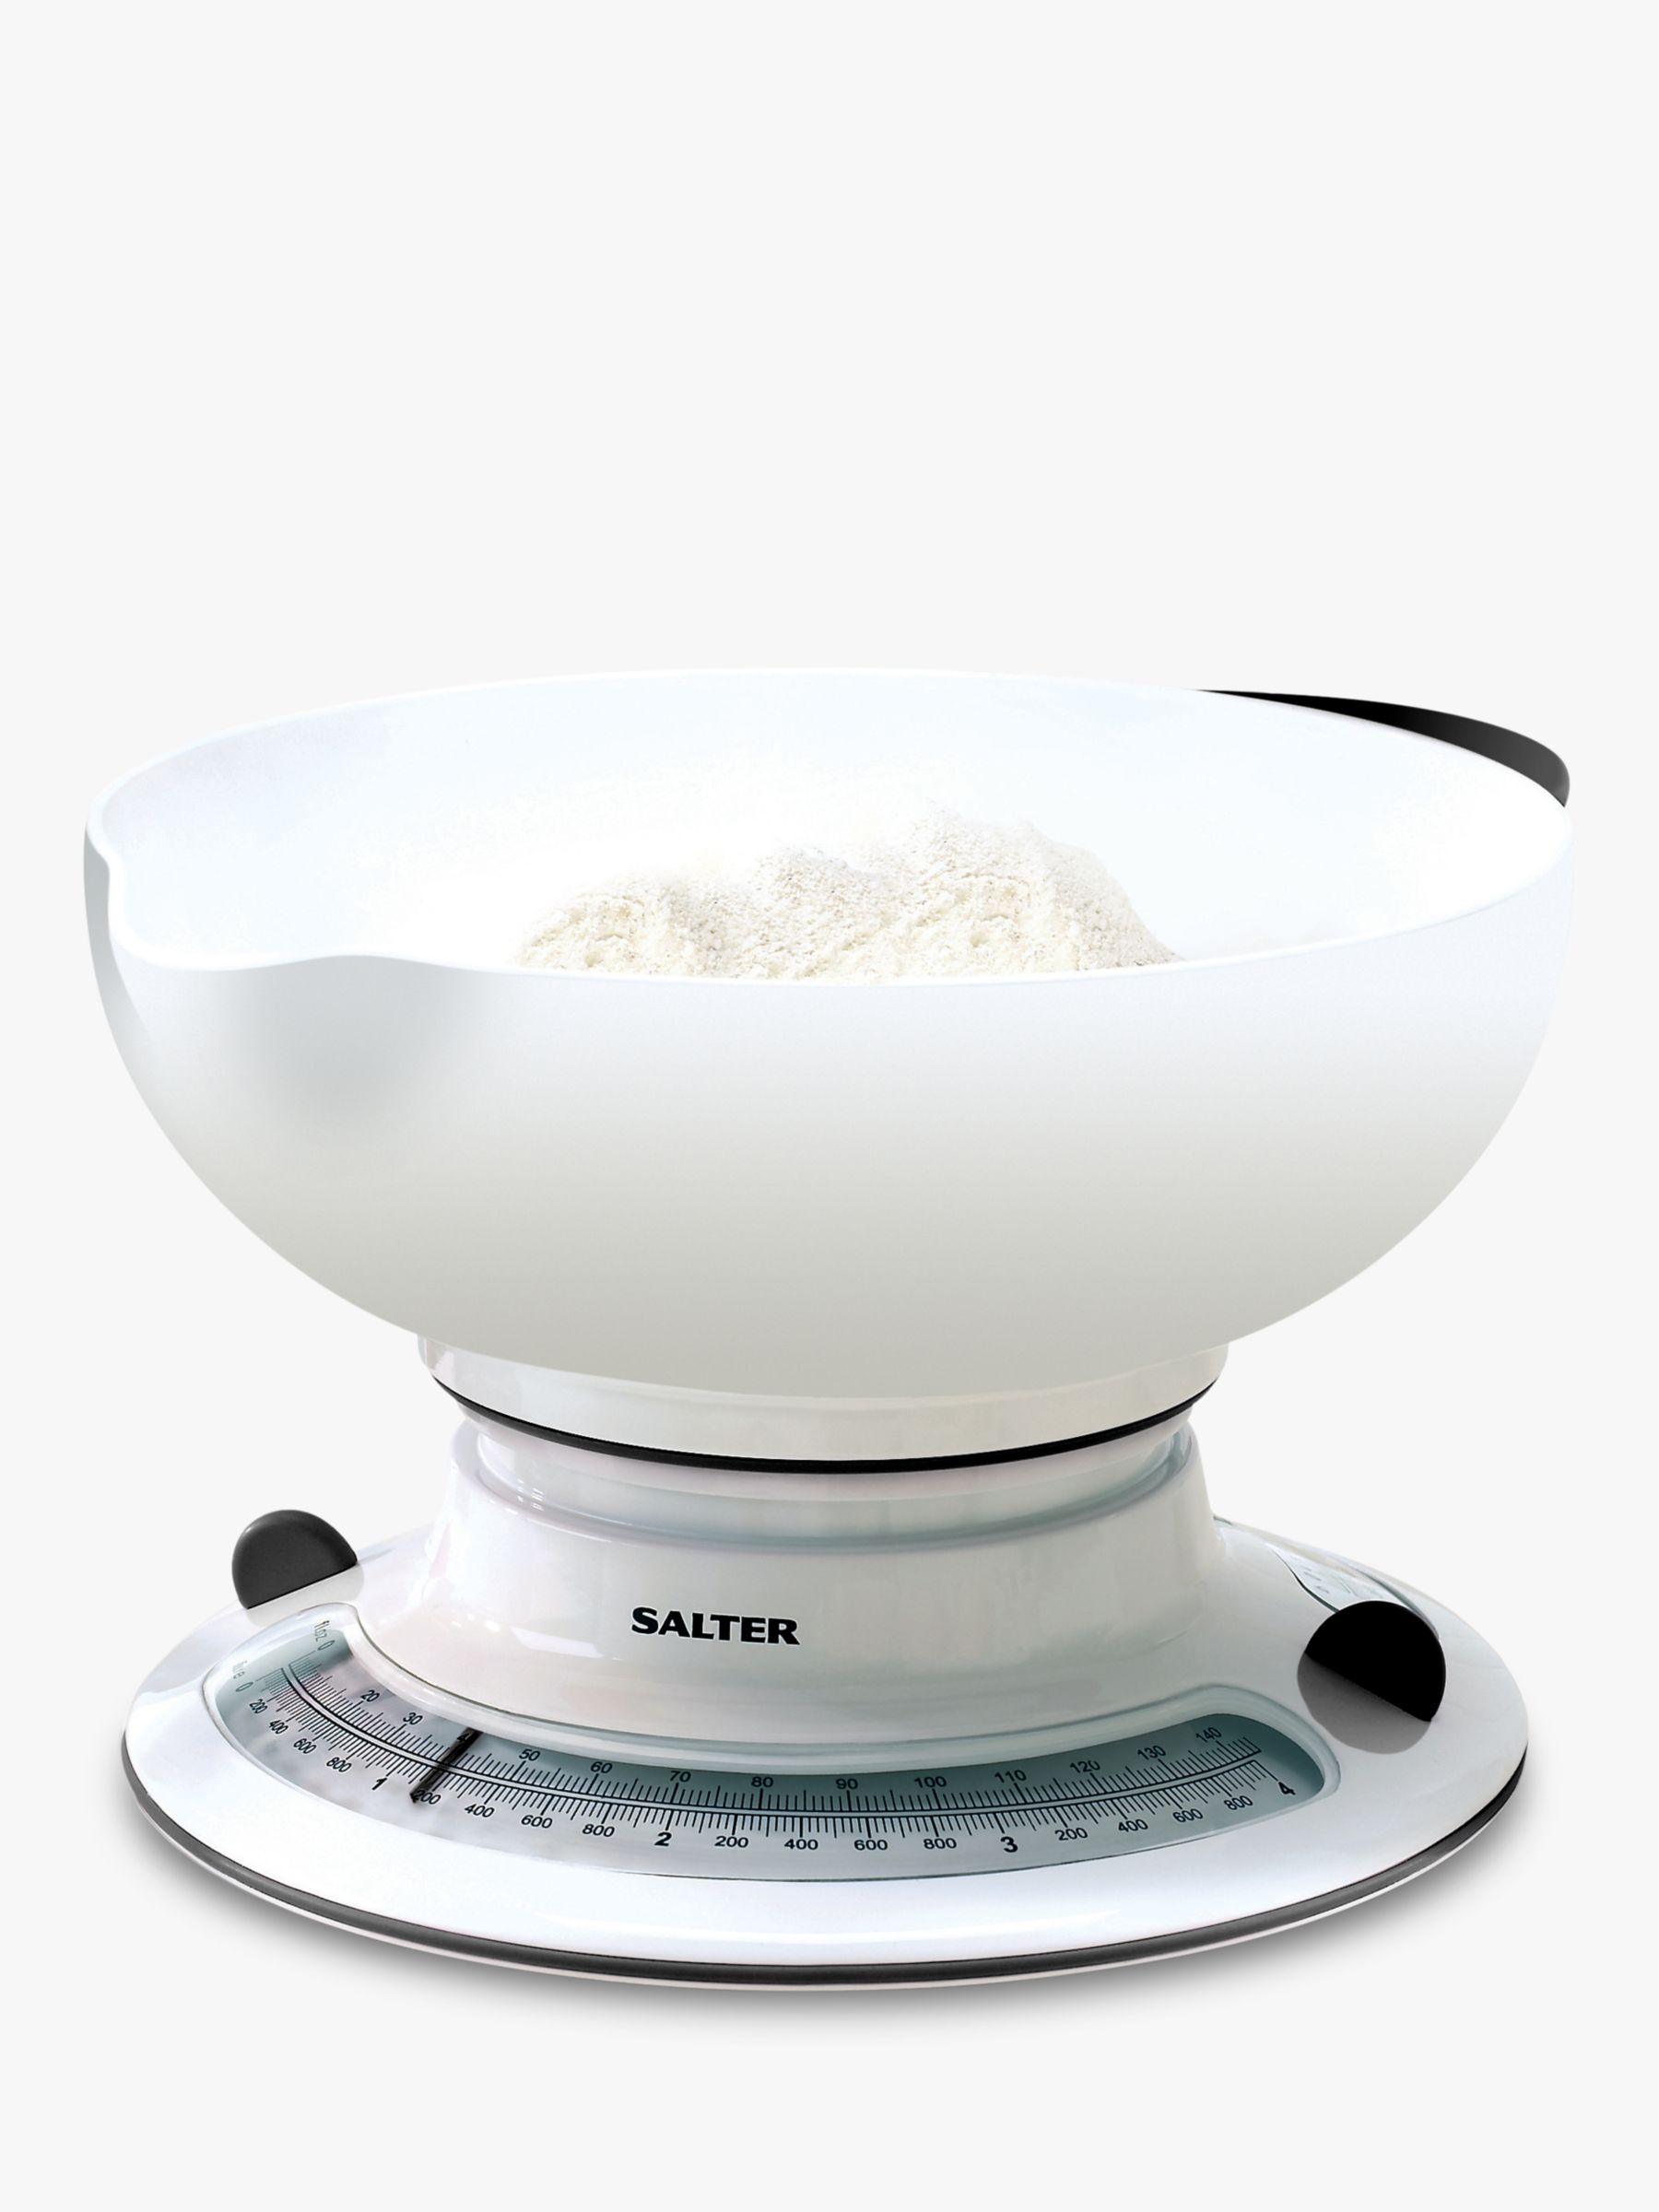 Salter Speedo Traditional Weighing Scale